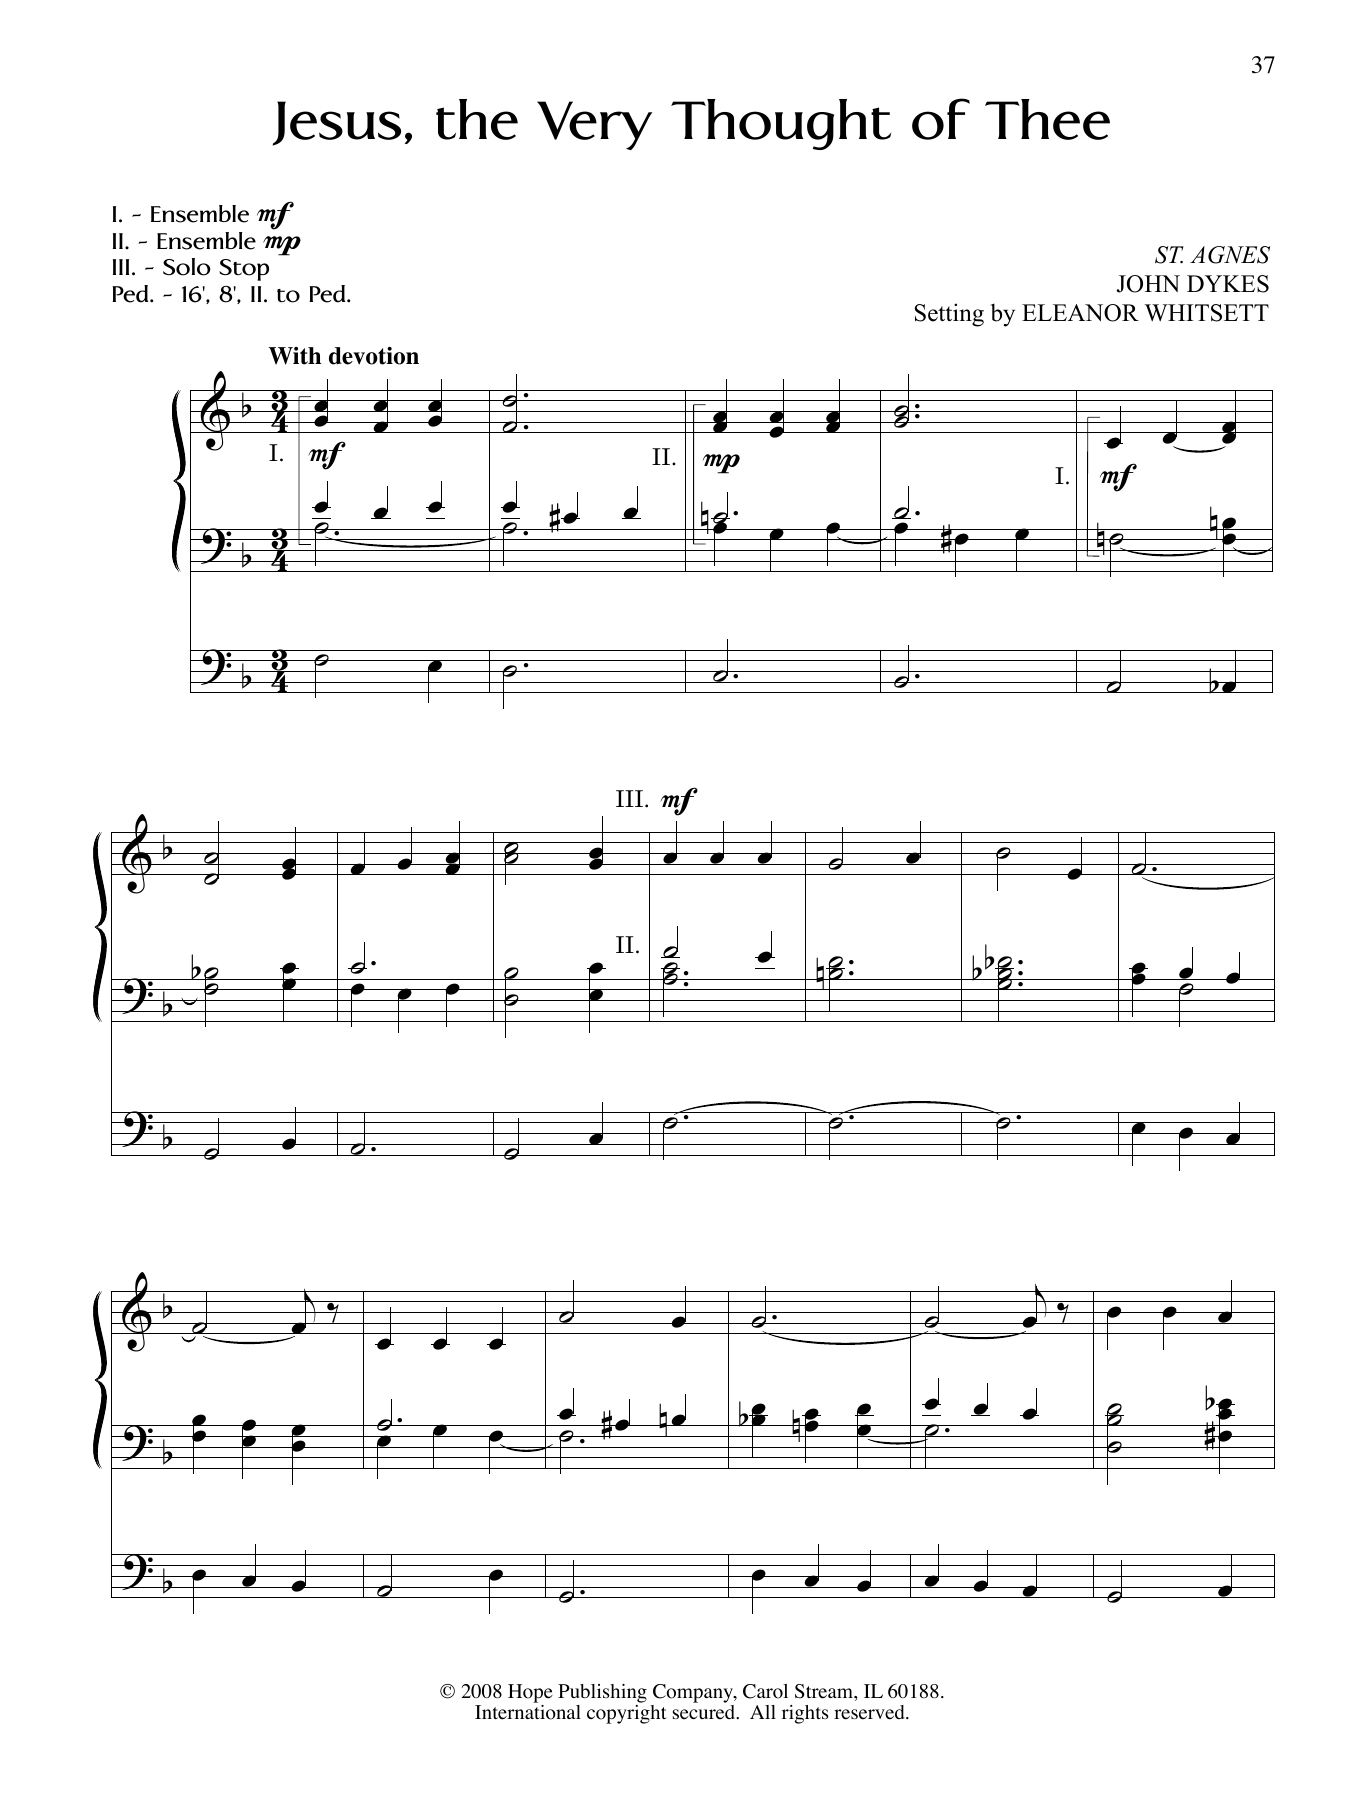 Download Eleanor Whitsett Jesus, The Very Thought of Thee Sheet Music